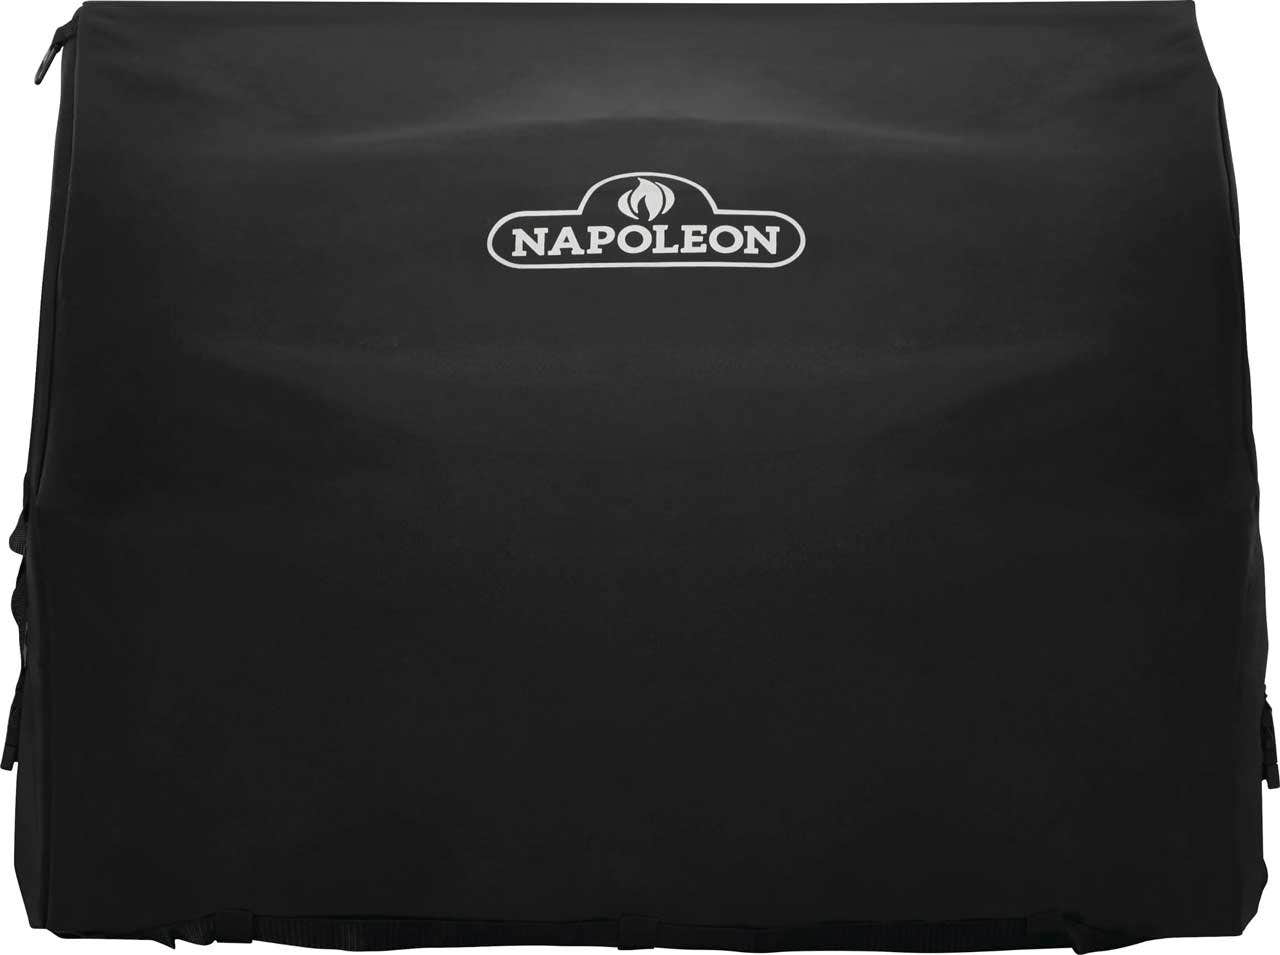 Napoleon Grills 32 inch 500 and 700-Series Built-In Grill Cover Outdoor Grill Covers 12034265